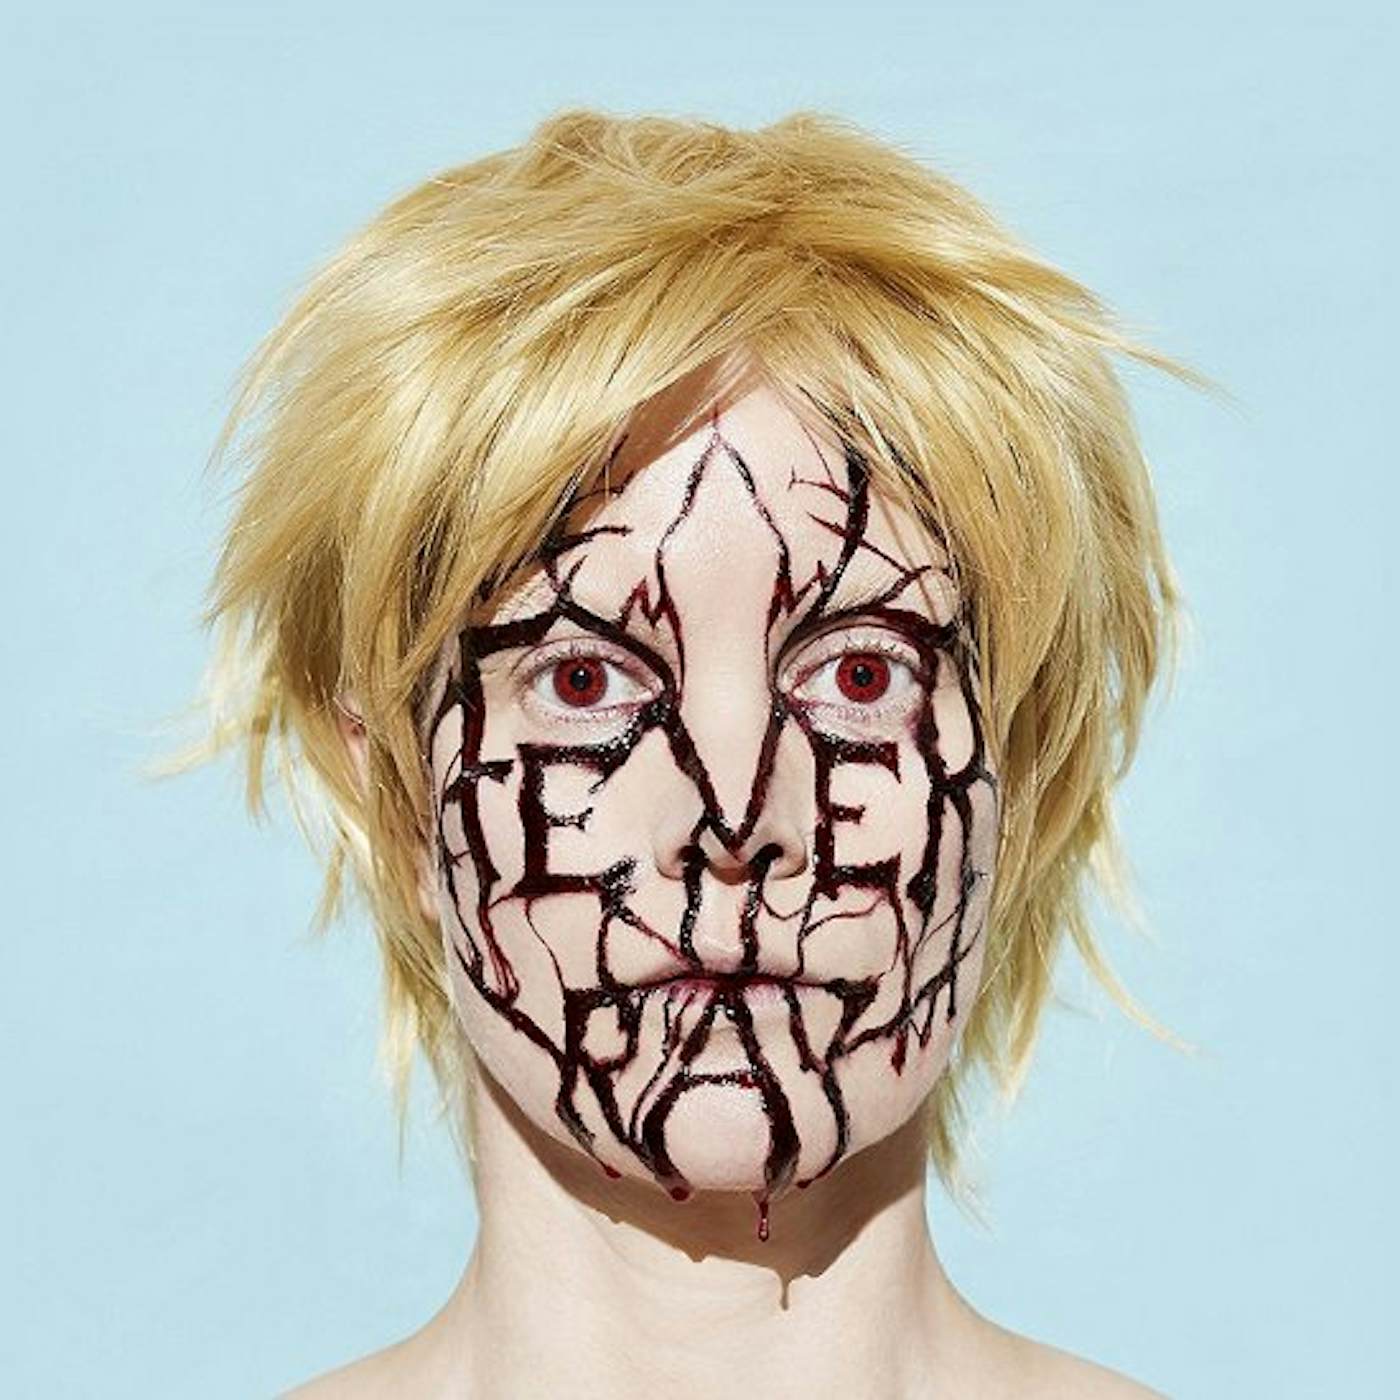 Fever Ray PLUNGE (DELUXE EDITION) Vinyl Record